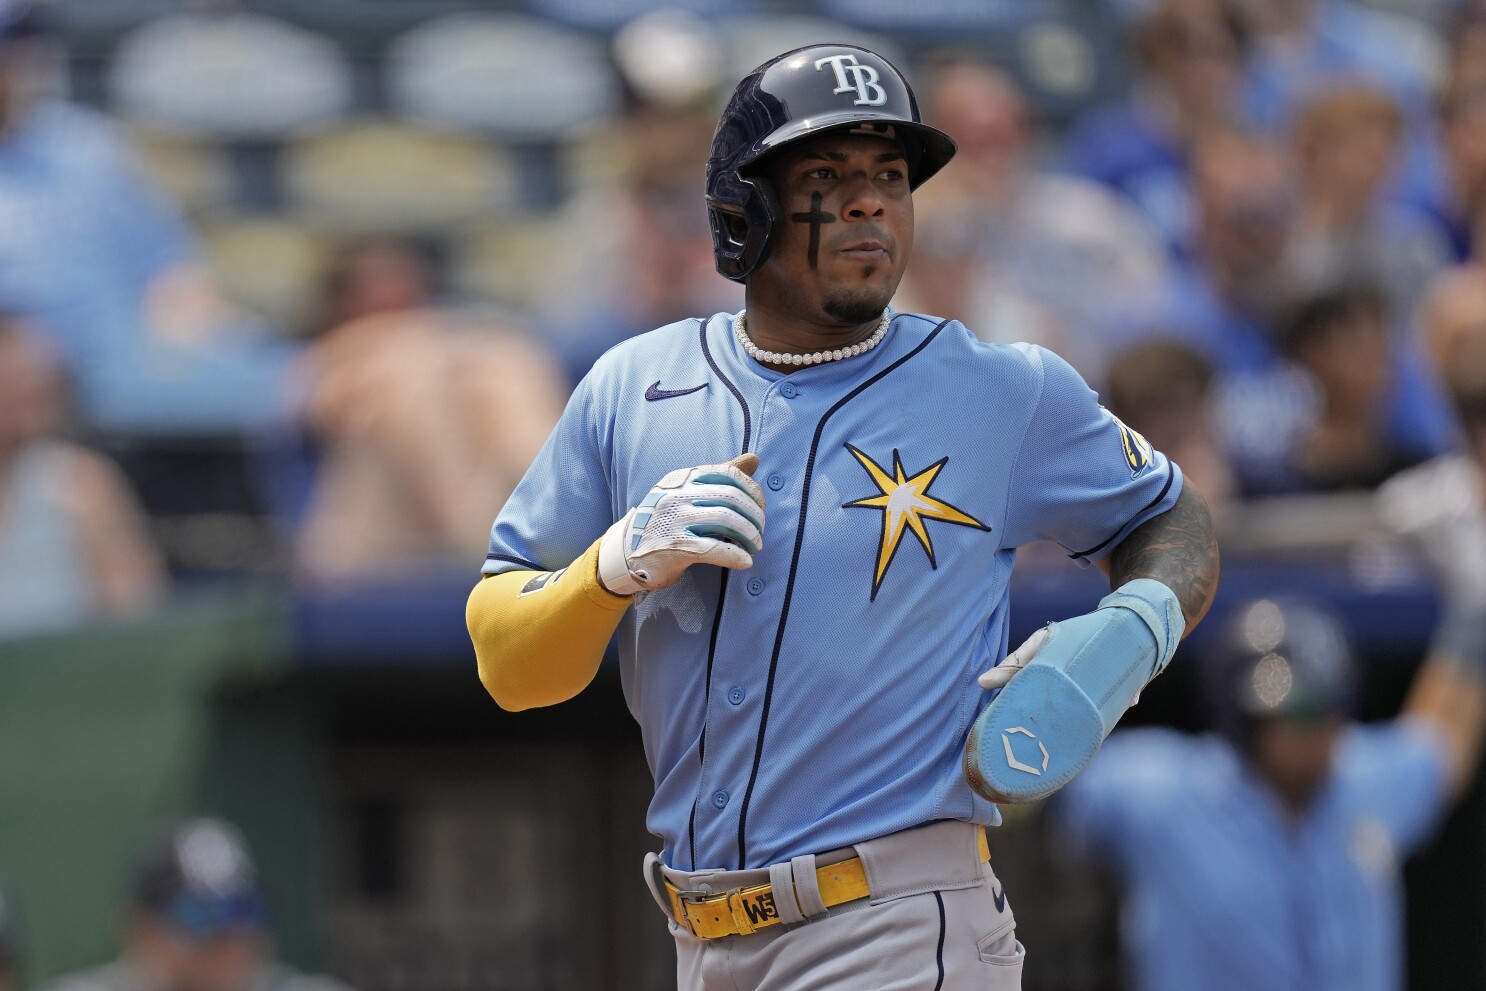 What Do The Rays Have To Do To Make The Playoffs?